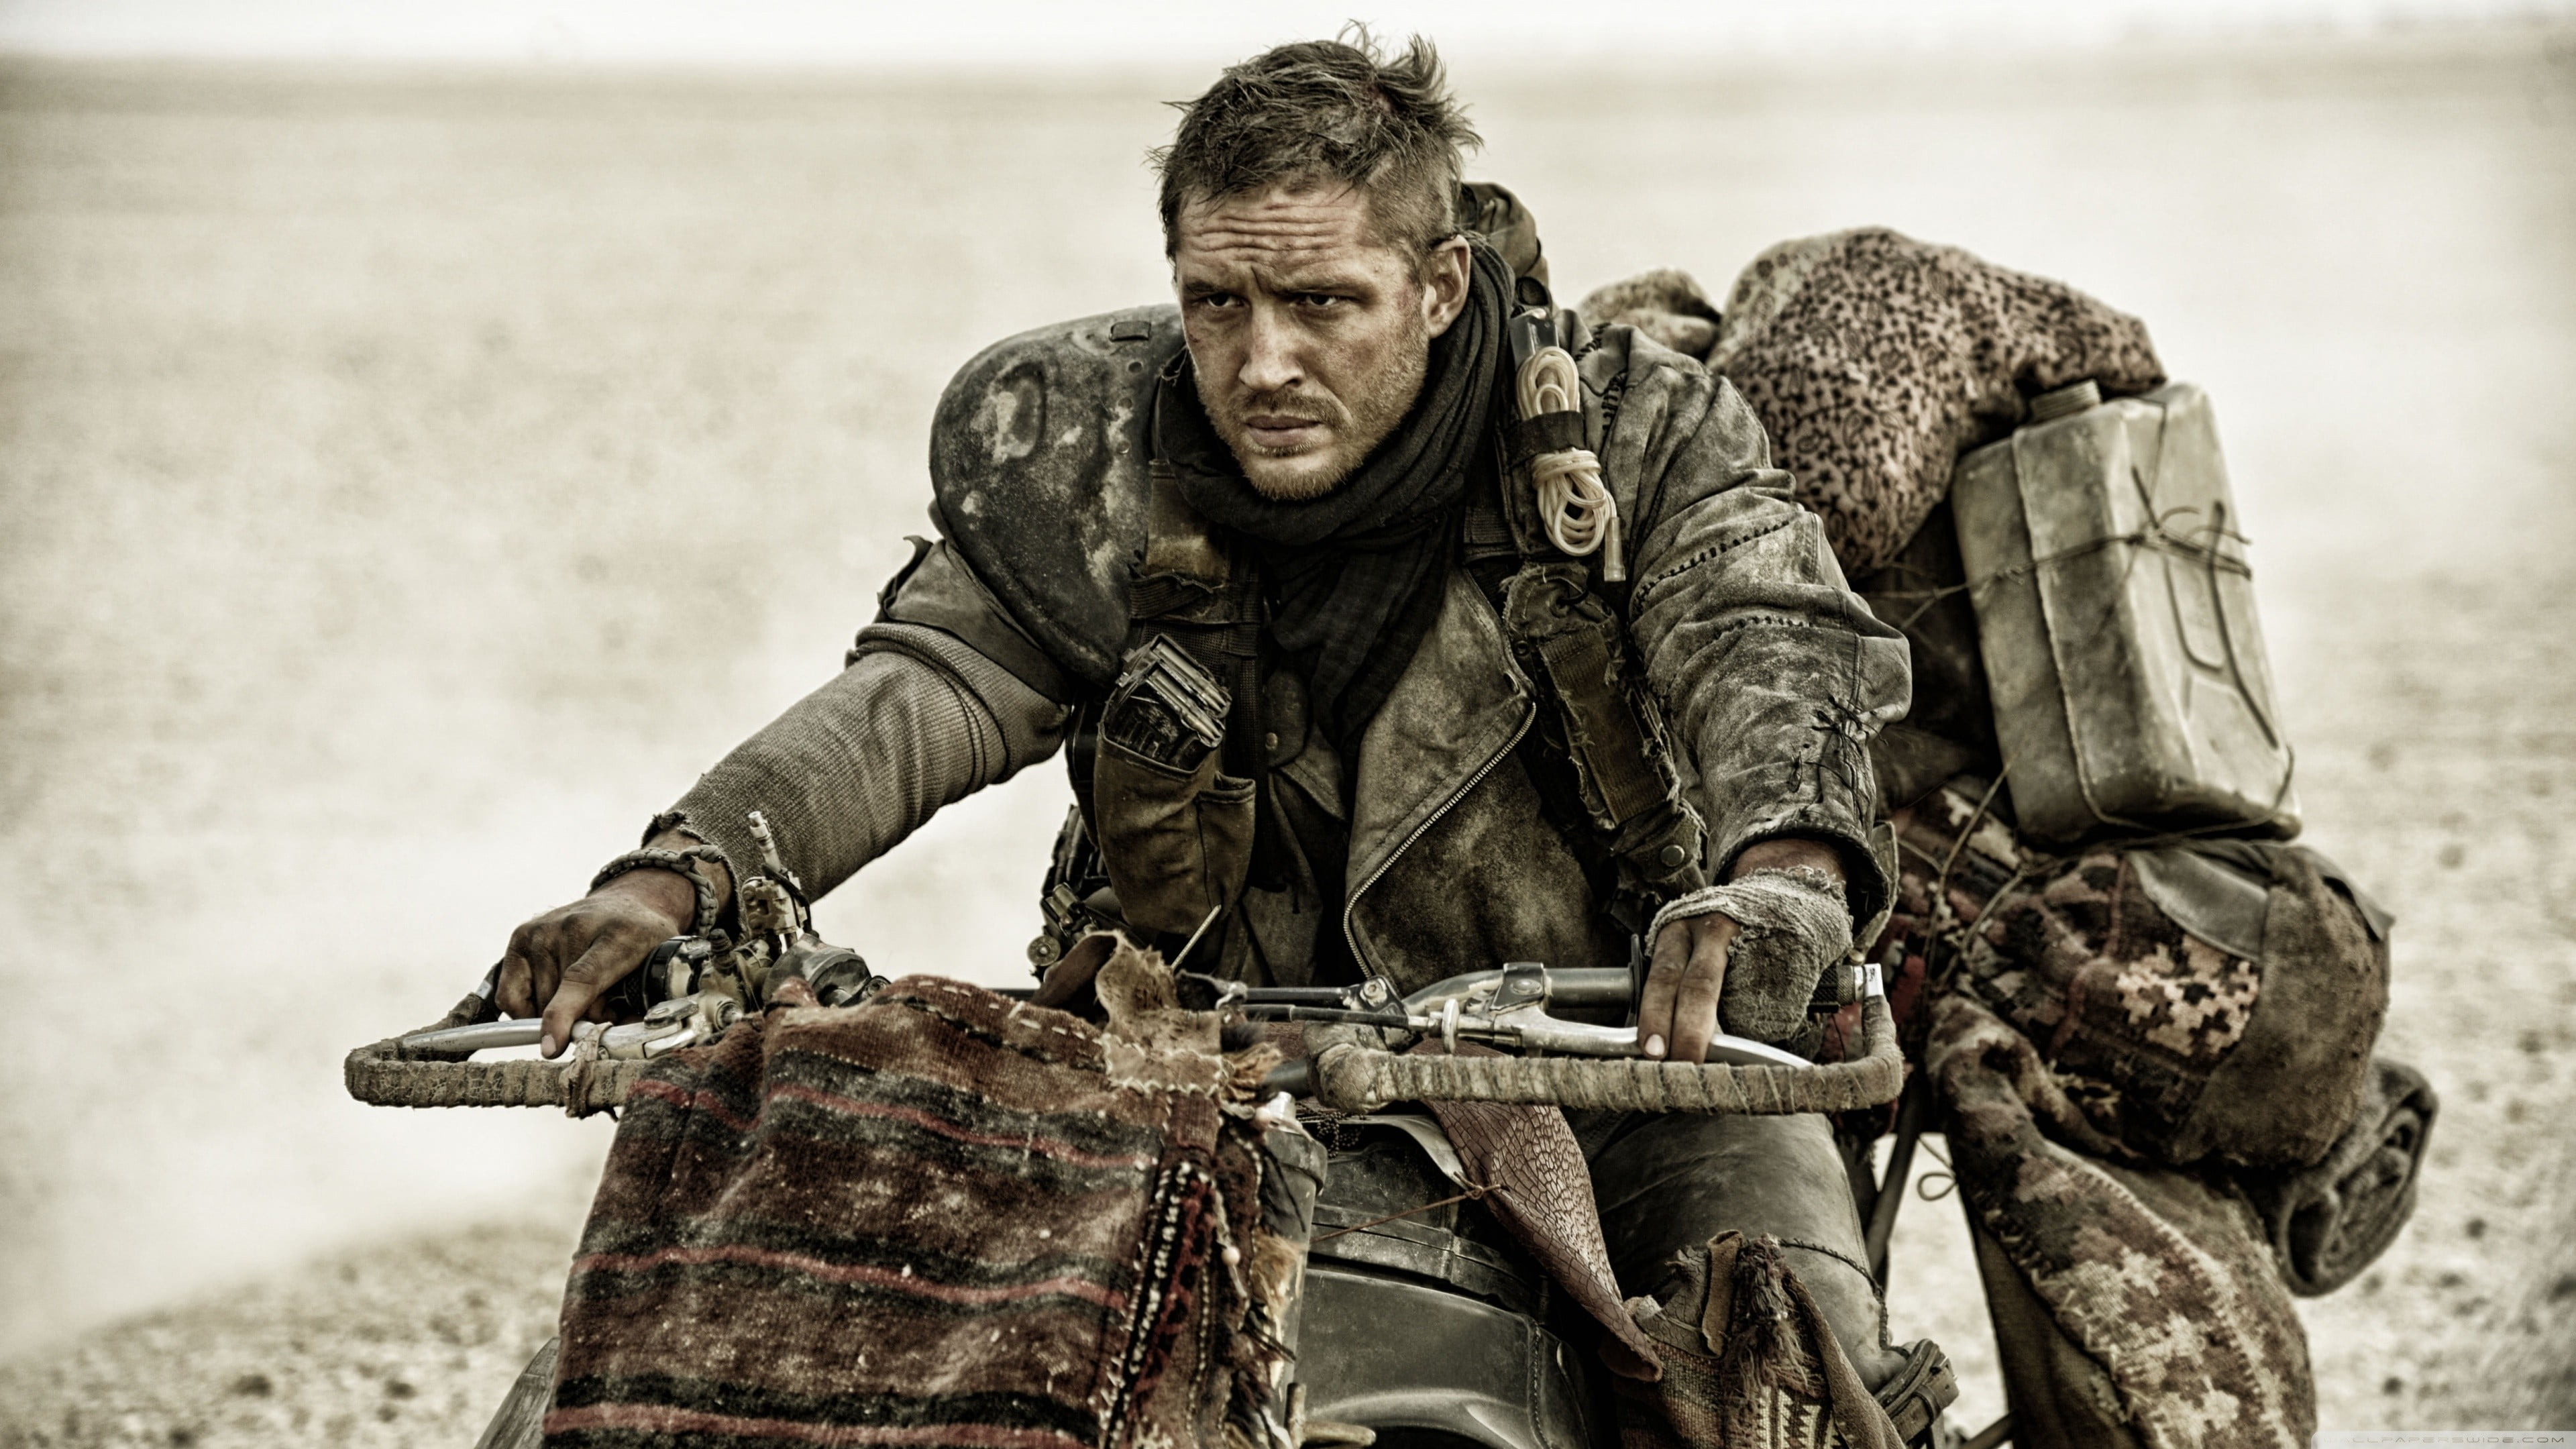 Mad Max, Mad Max: Fury Road, movies, armed forces, one person